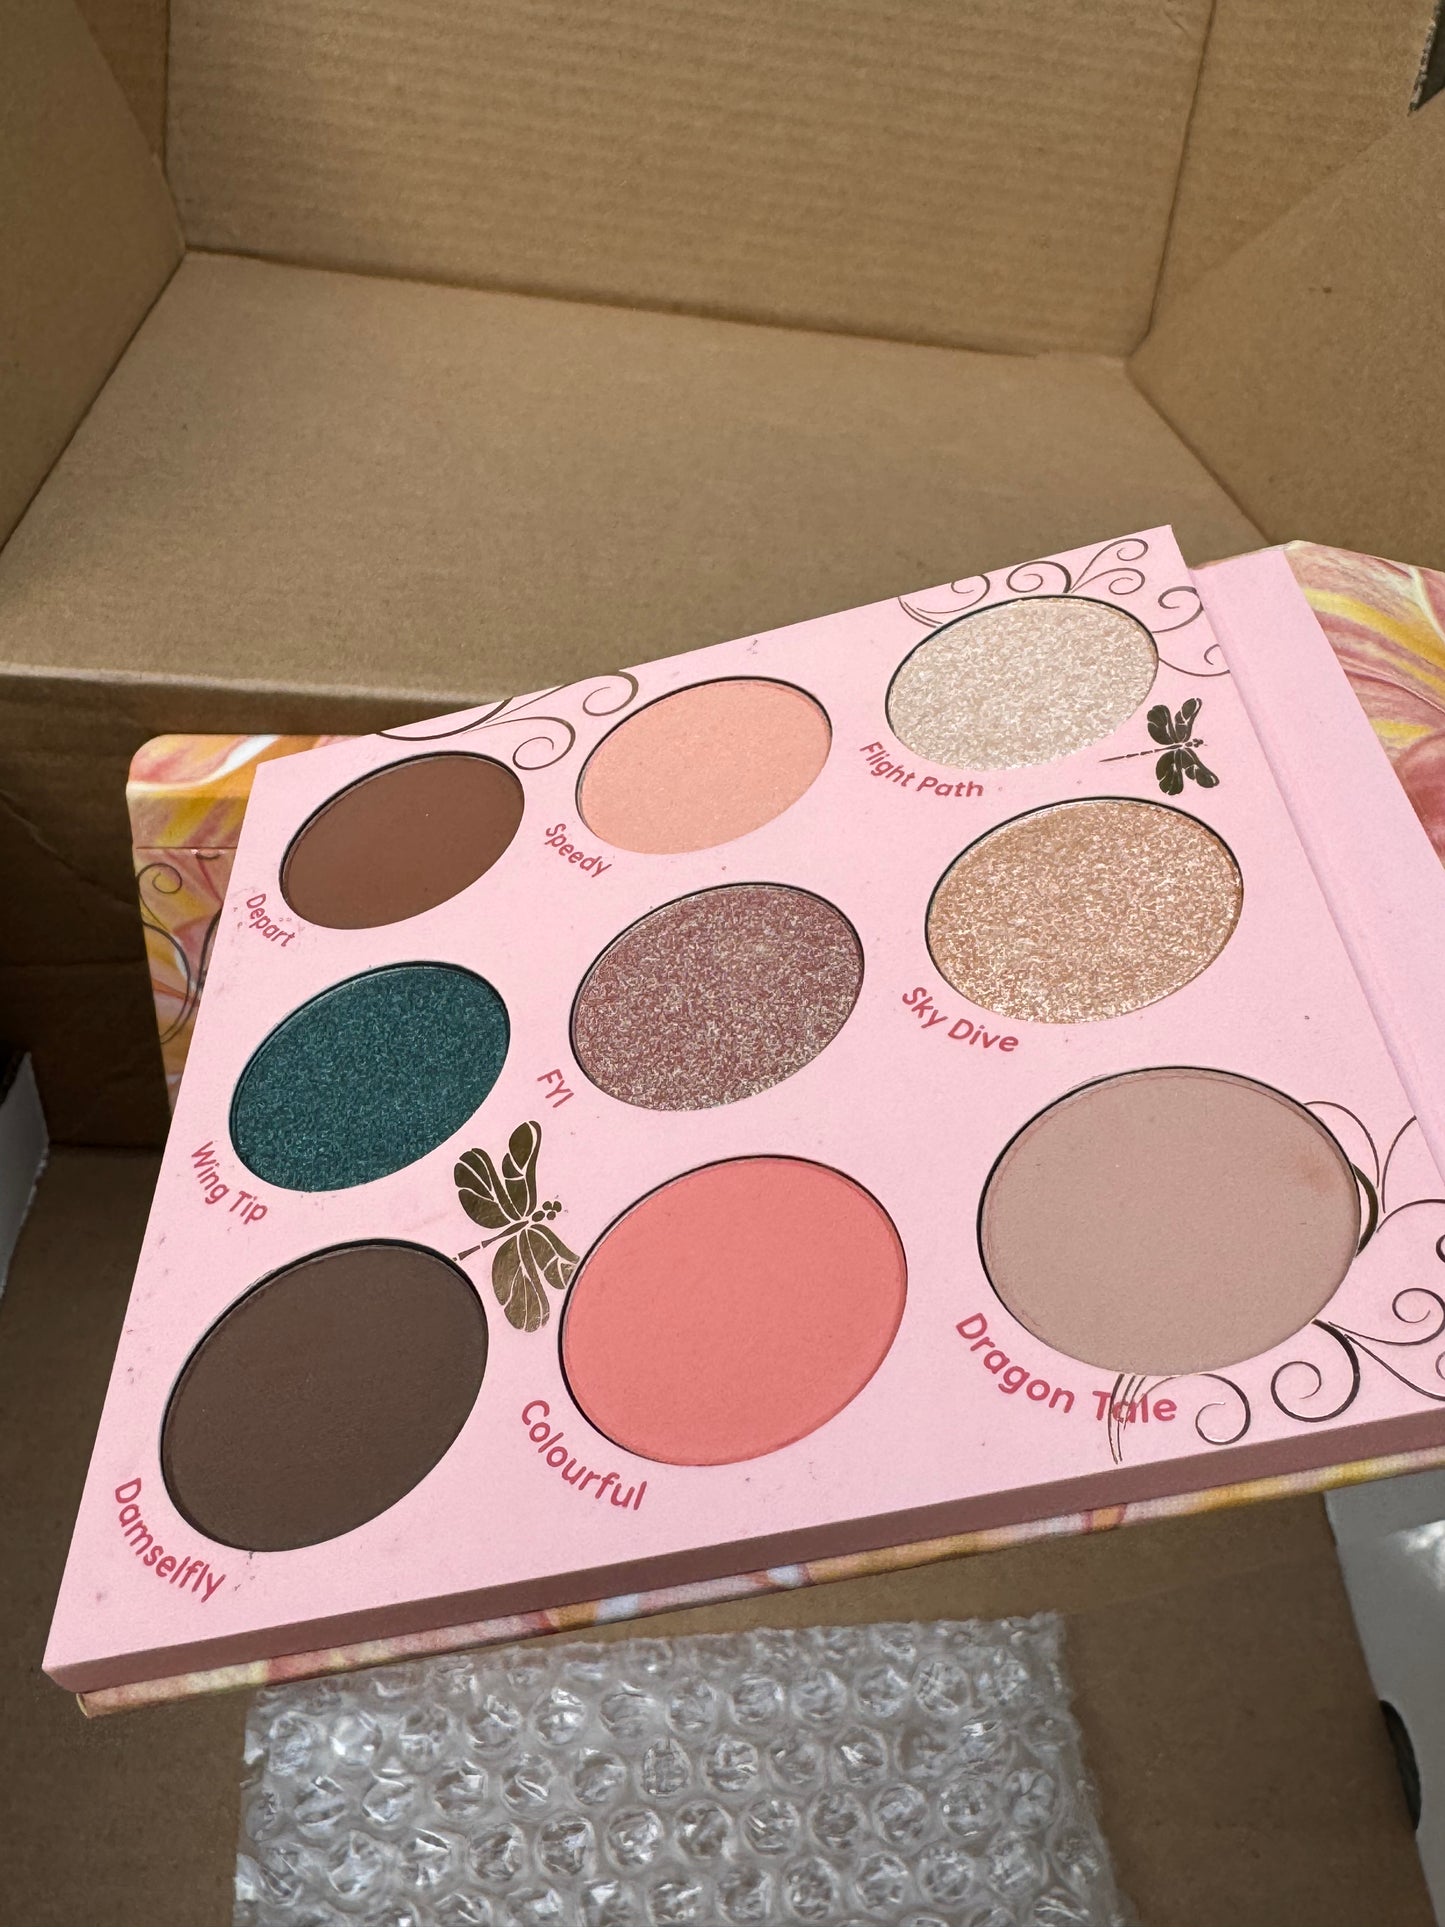 ColourPop So Fly Shadow Palette